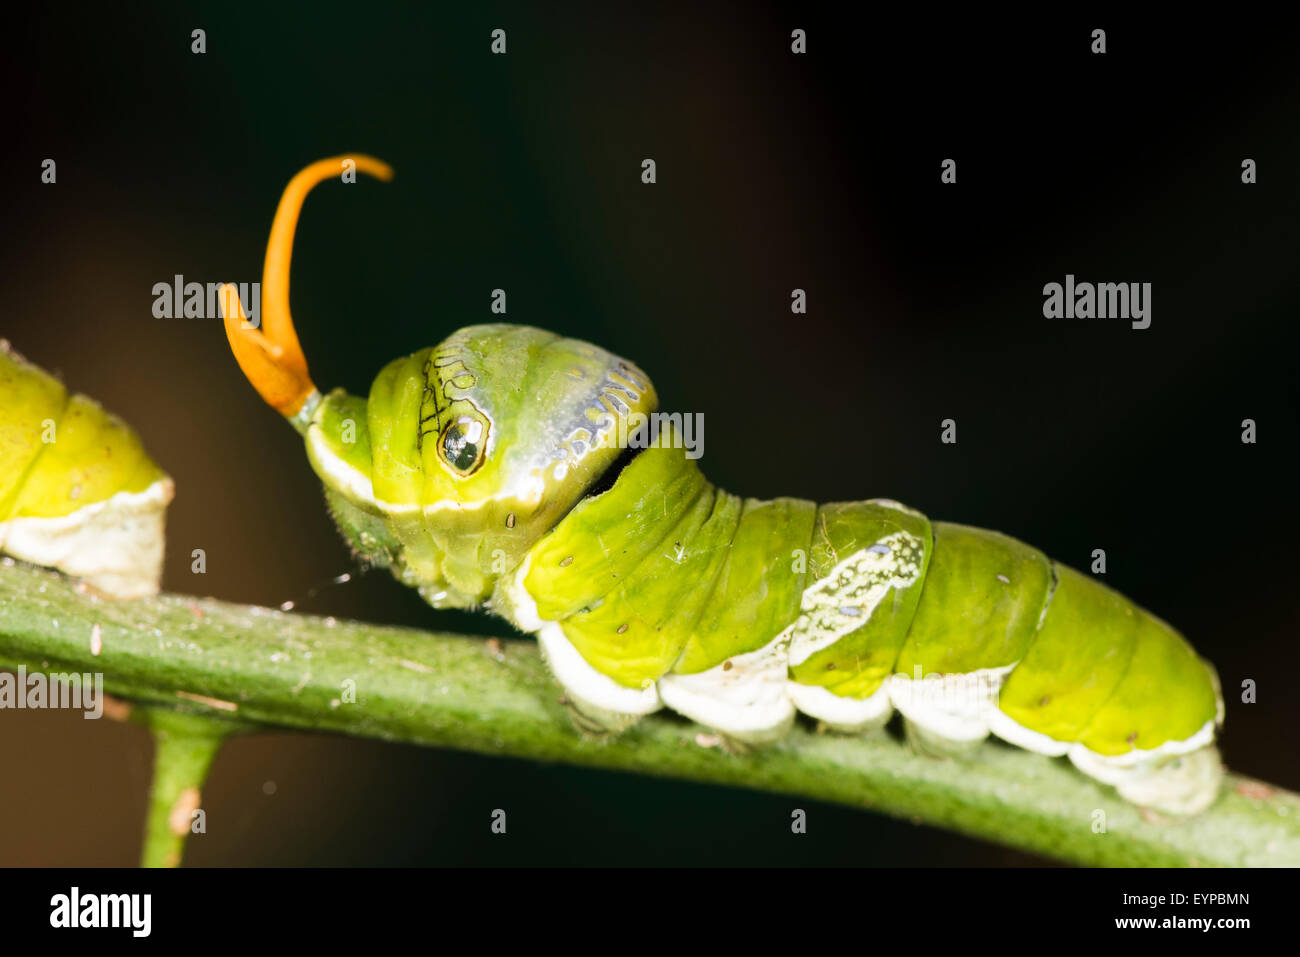 A caterpillar of the Citrus Swallowtail butterfly Stock Photo